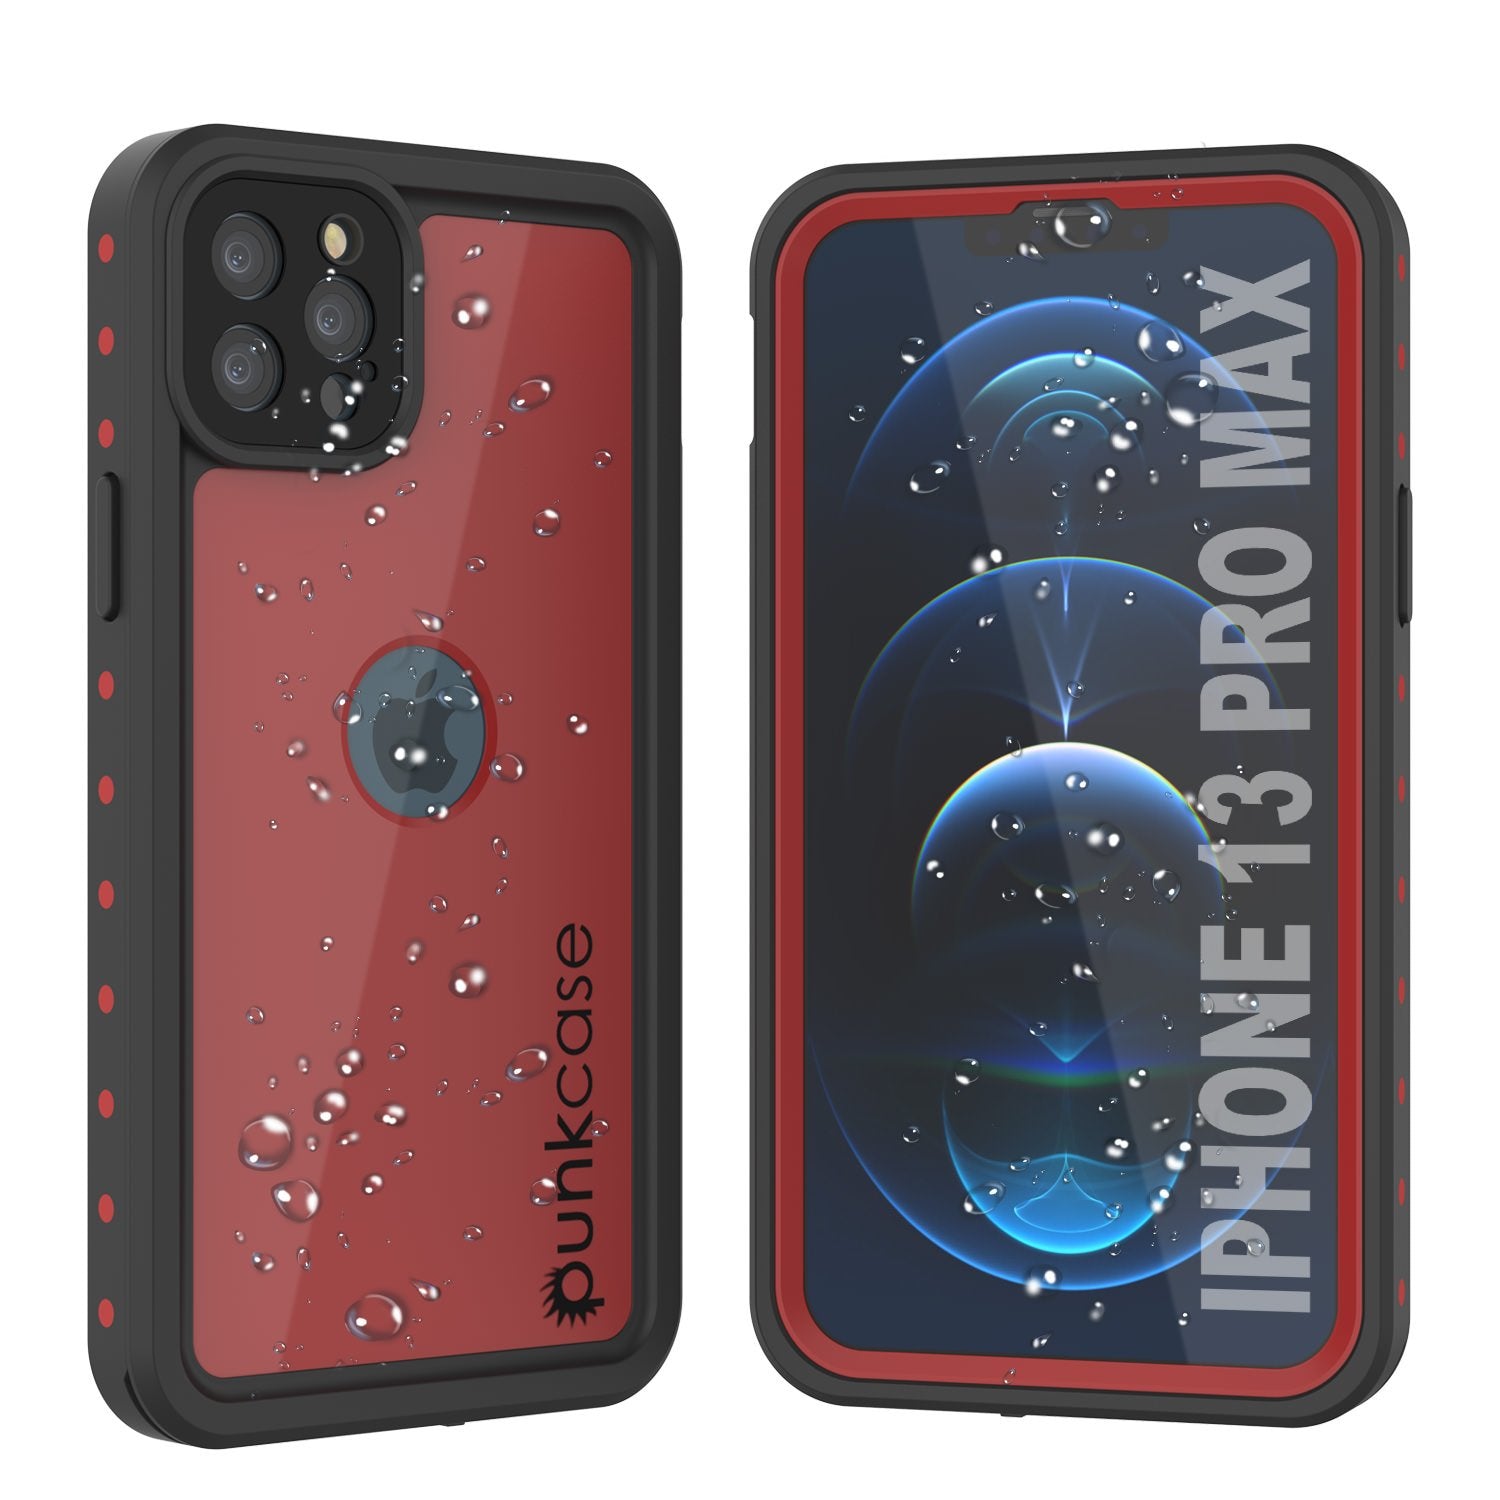 iPhone 13 Pro Max Waterproof IP68 Case, Punkcase [Red] [StudStar Series] [Slim Fit] (Color in image: Red)